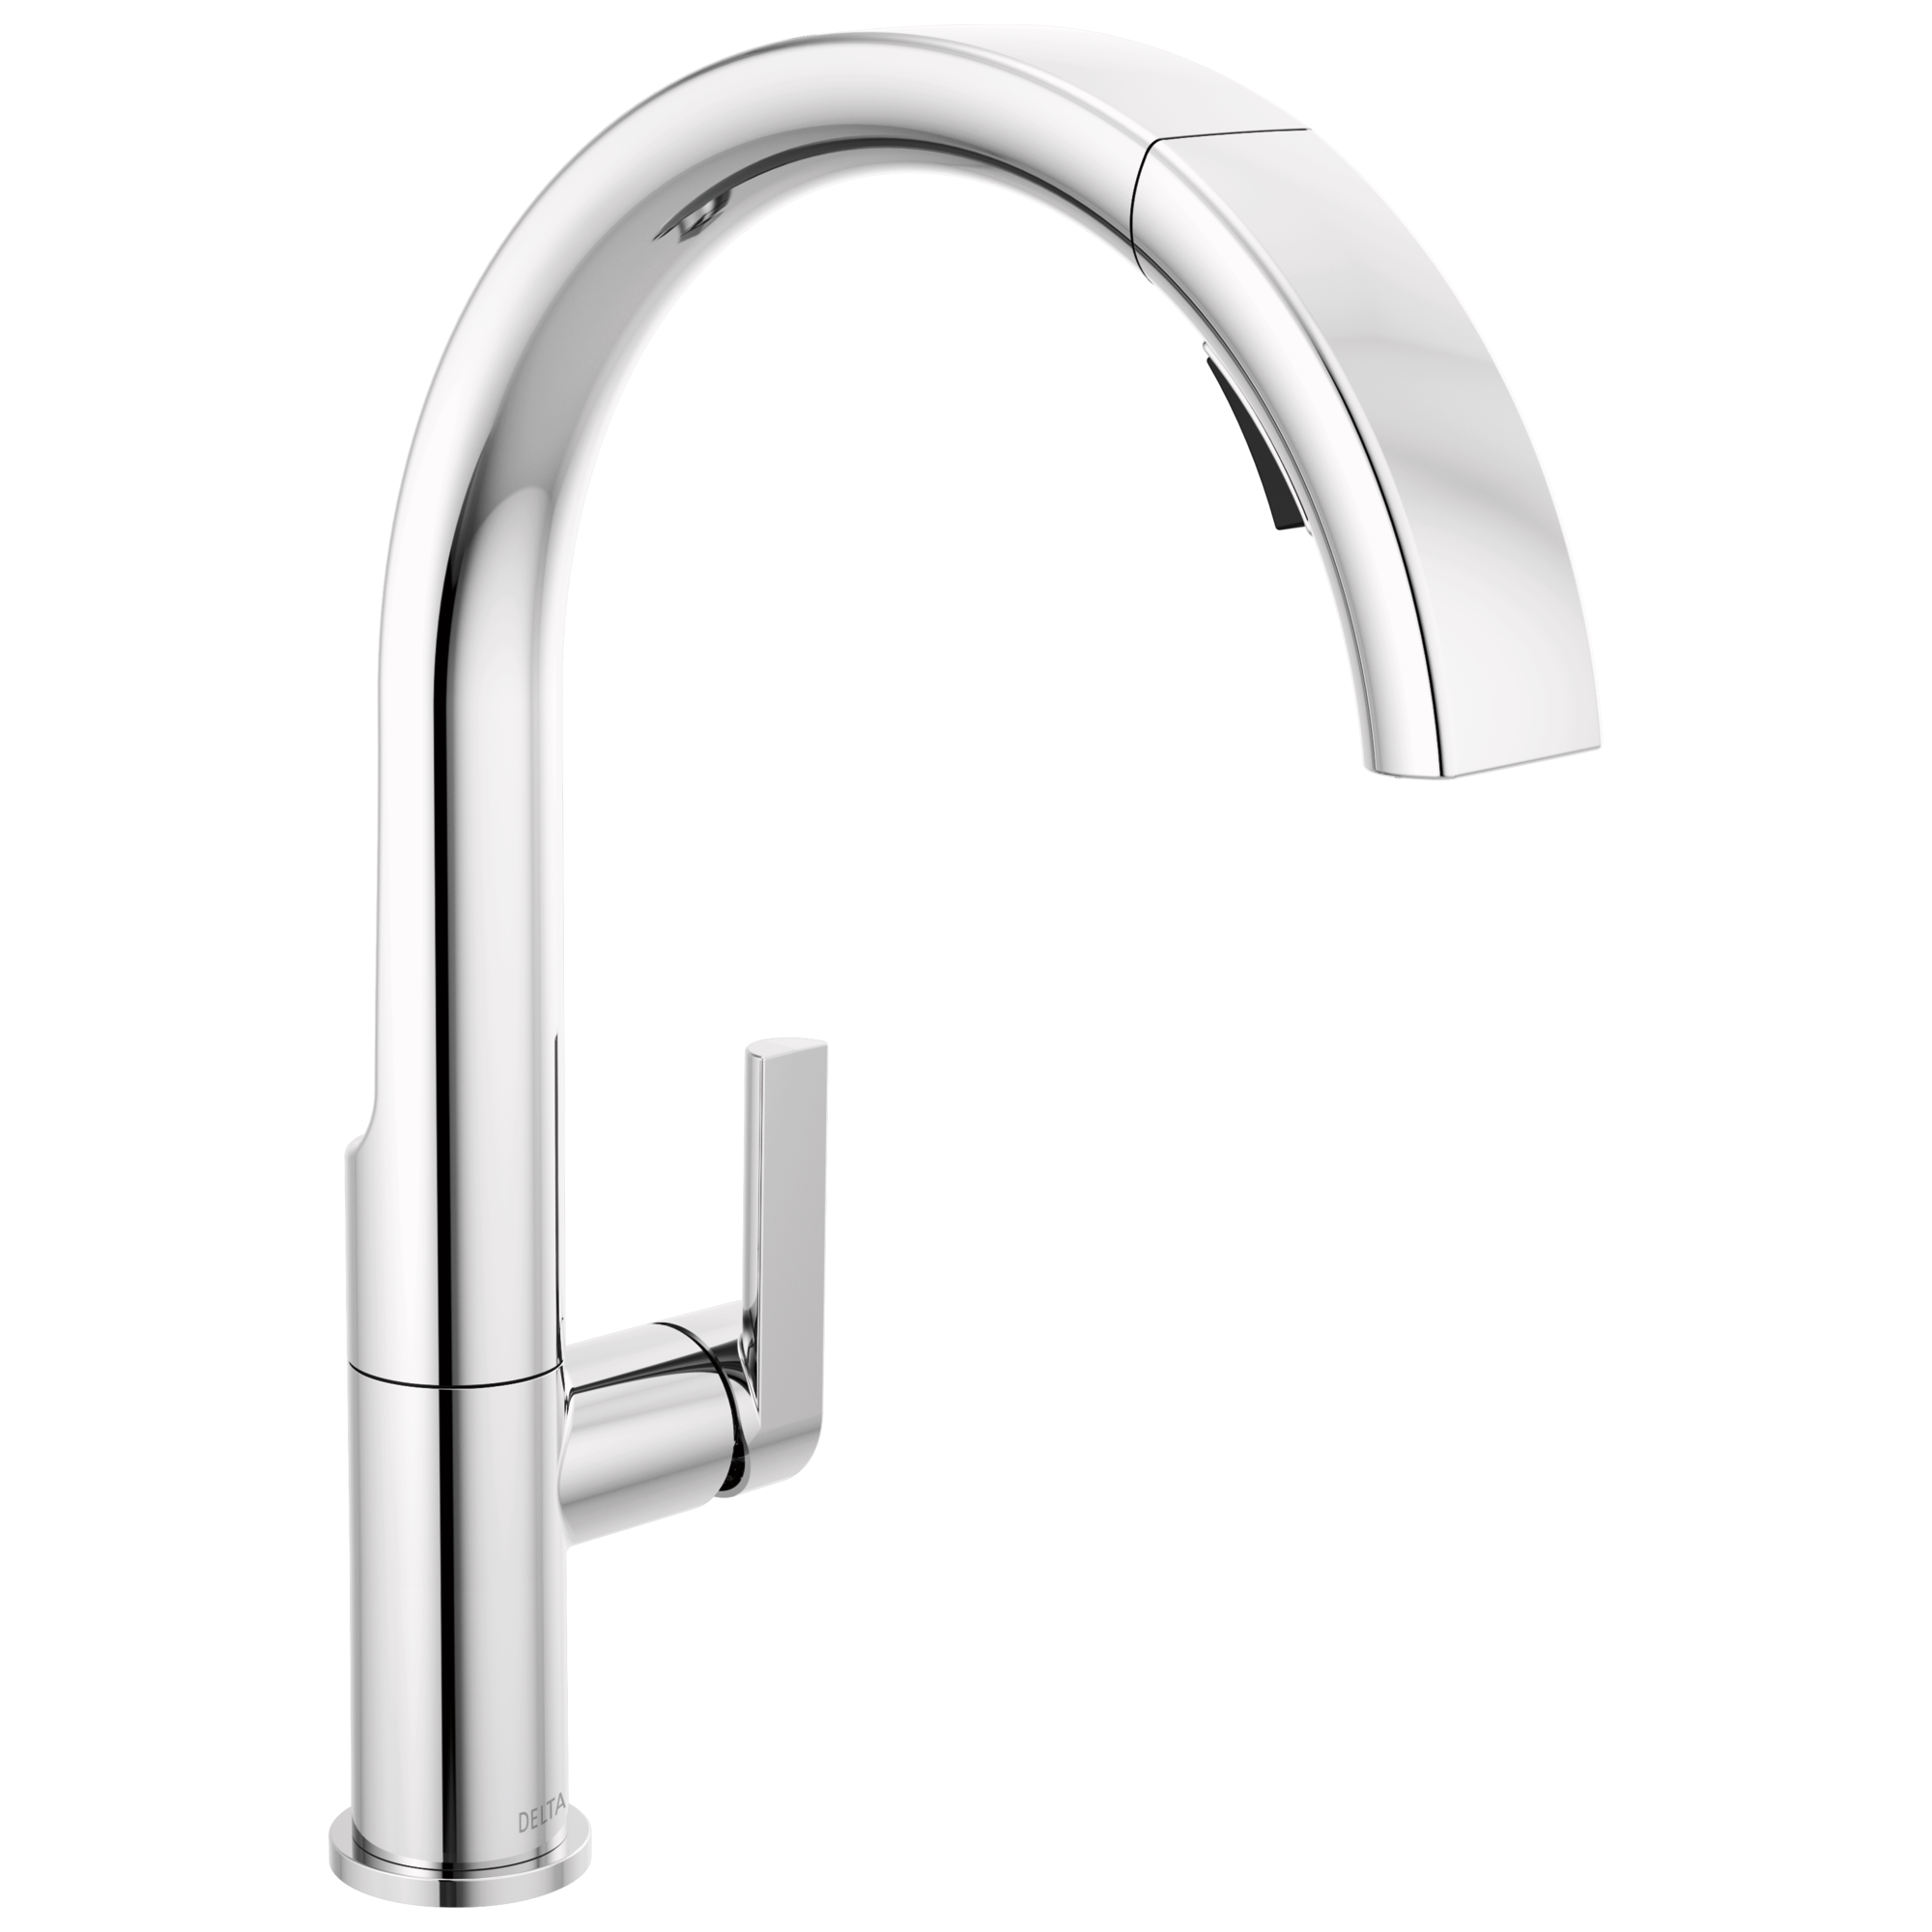 Chrome Kitchen Faucet Swivel Spout Single Handle Sink Pull Out Spray Mixer Tap 